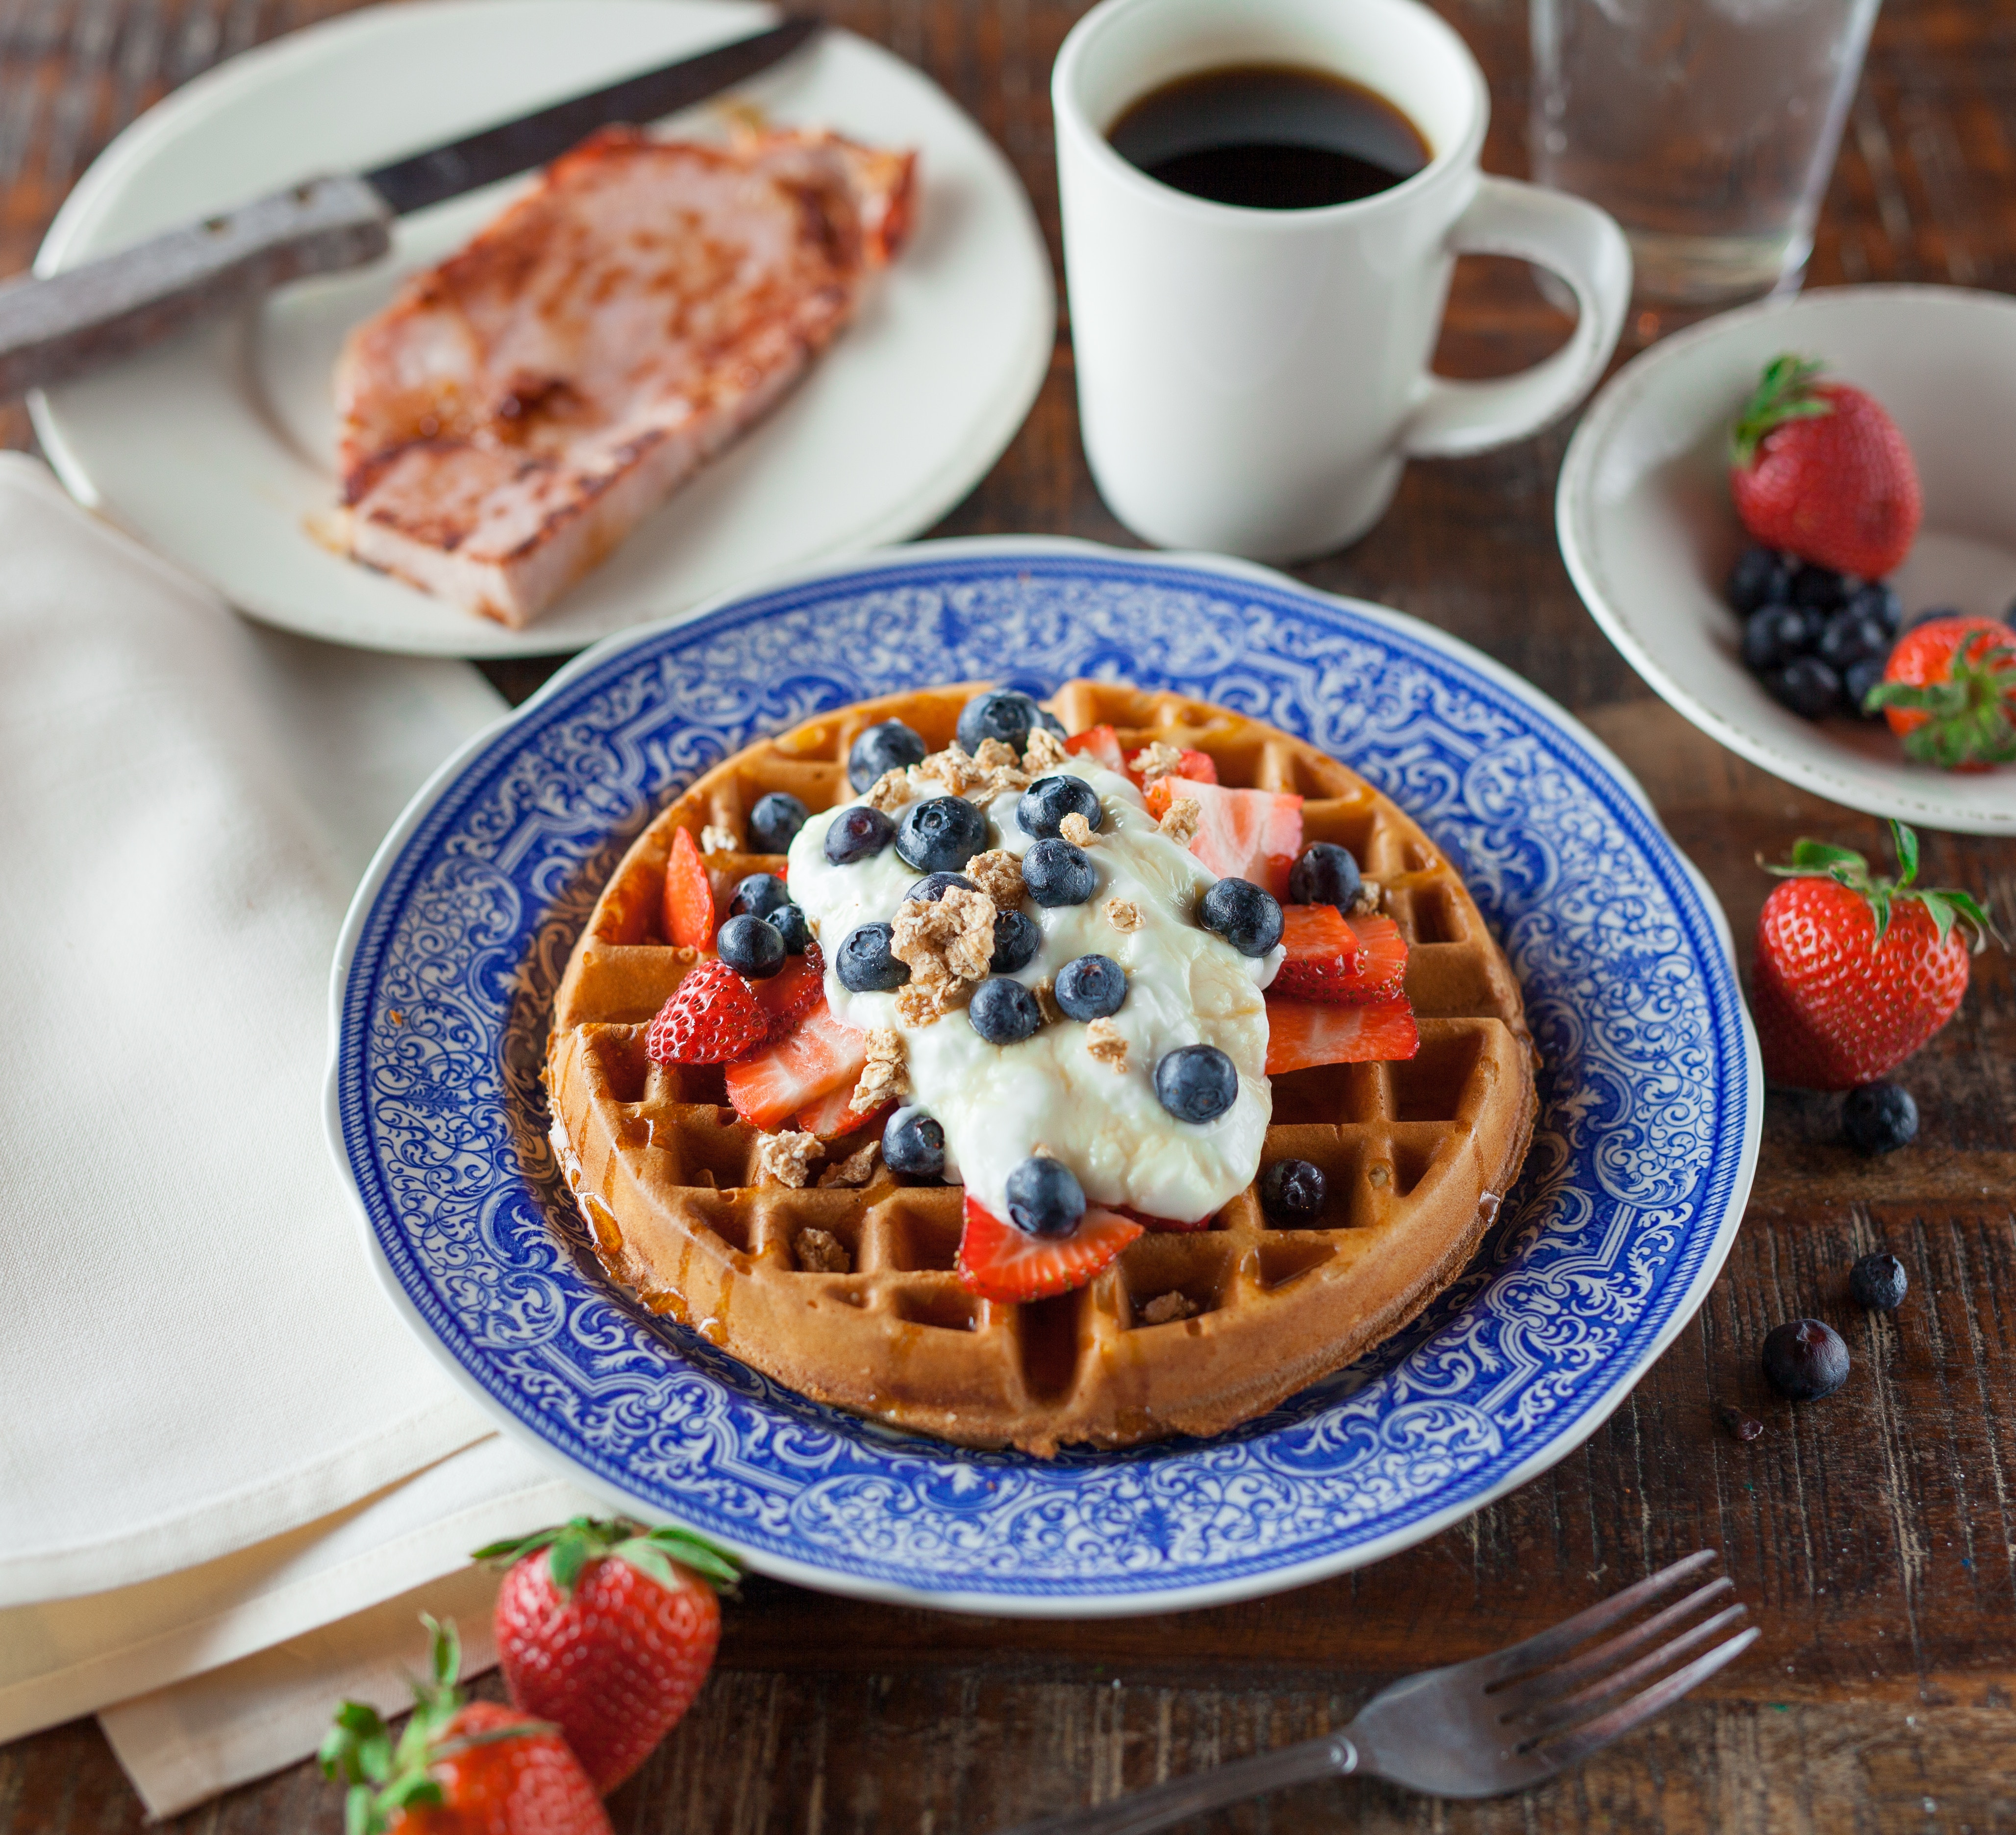 General 4113x3744 waffles coffee plates strawberries blueberries food table knife wooden surface closeup fork cup drink still life berries